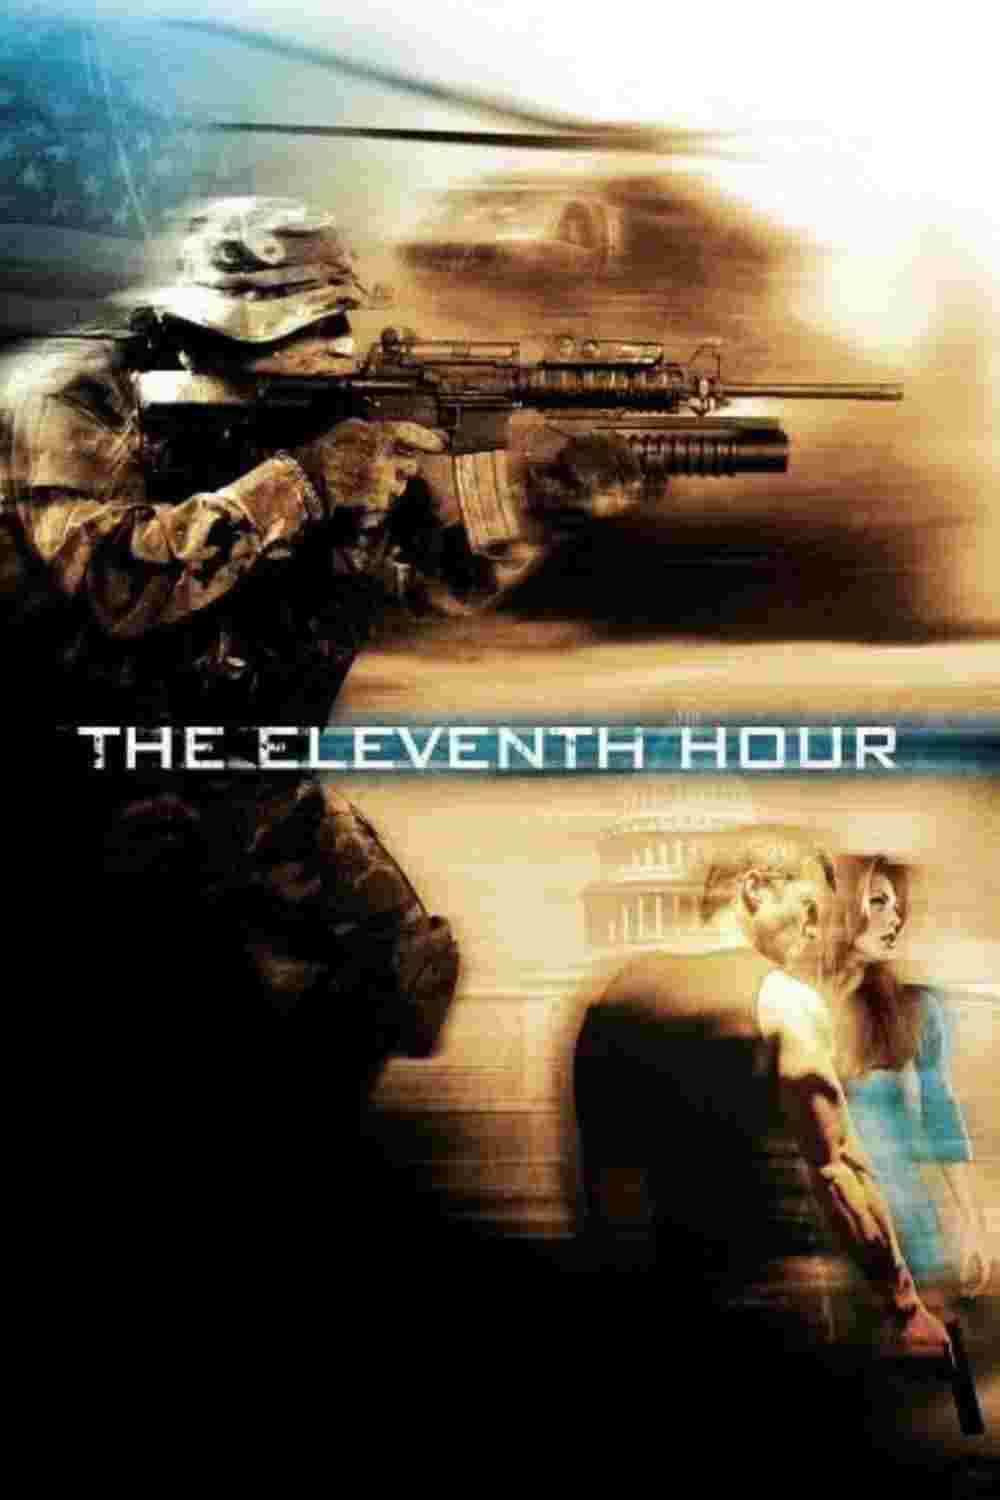 The Eleventh Hour (2008) Matthew Reese